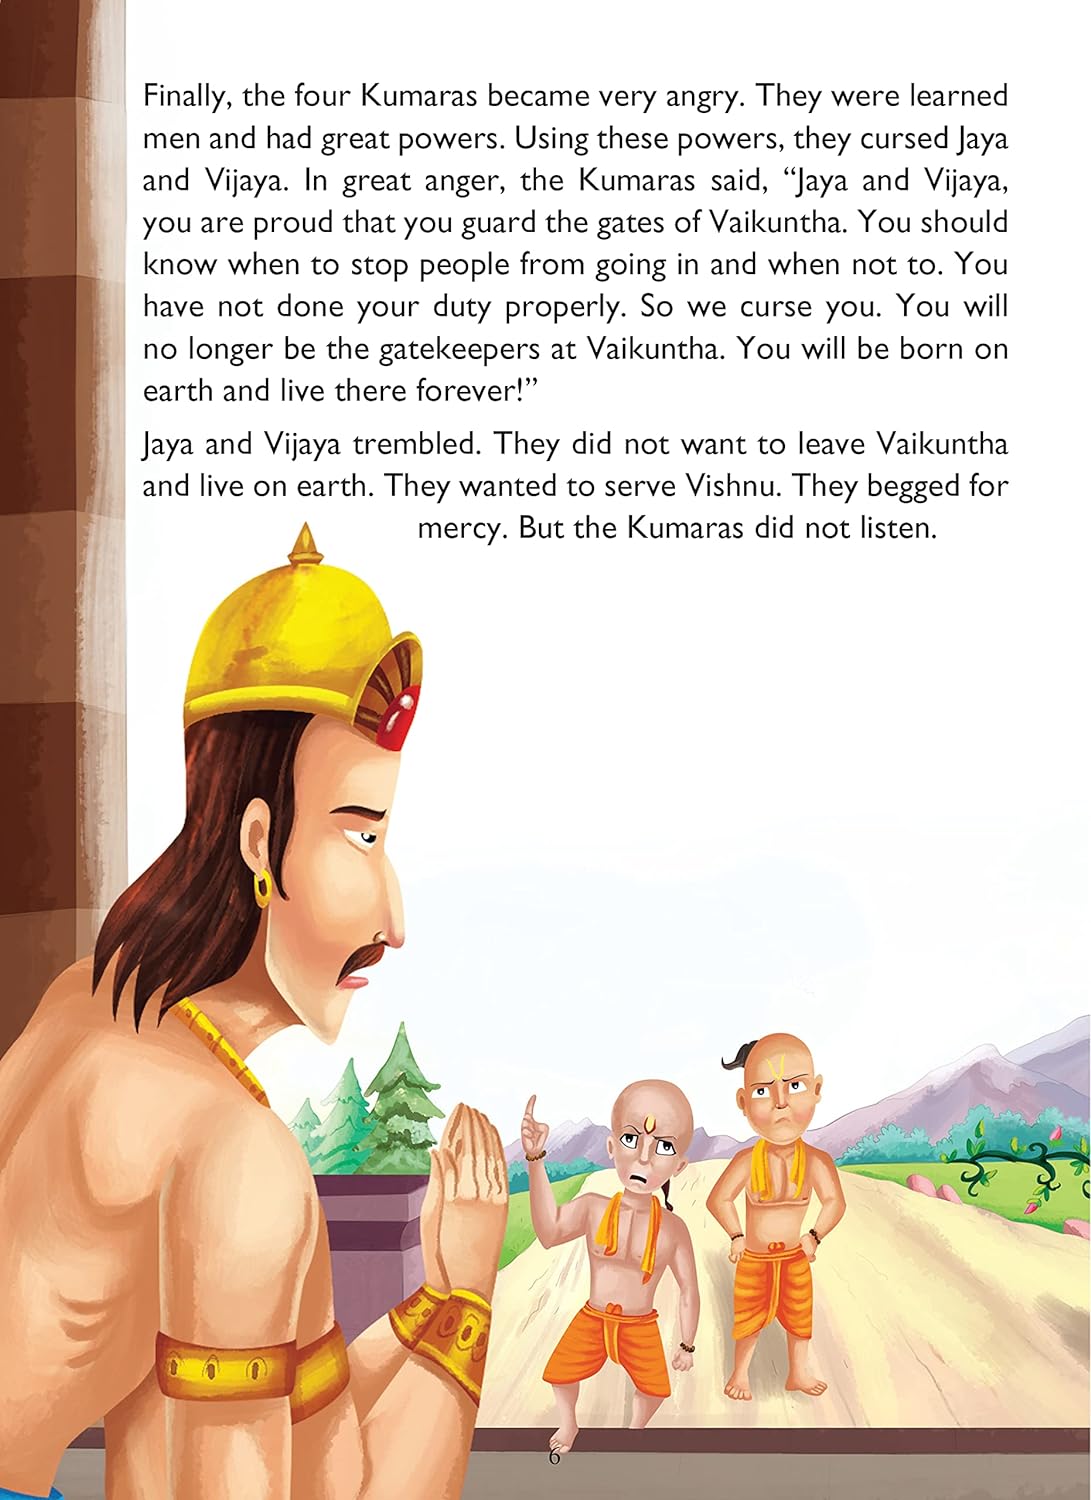 Pegasus Tales of Righteous Lord Rama - Indian Mythological Stories